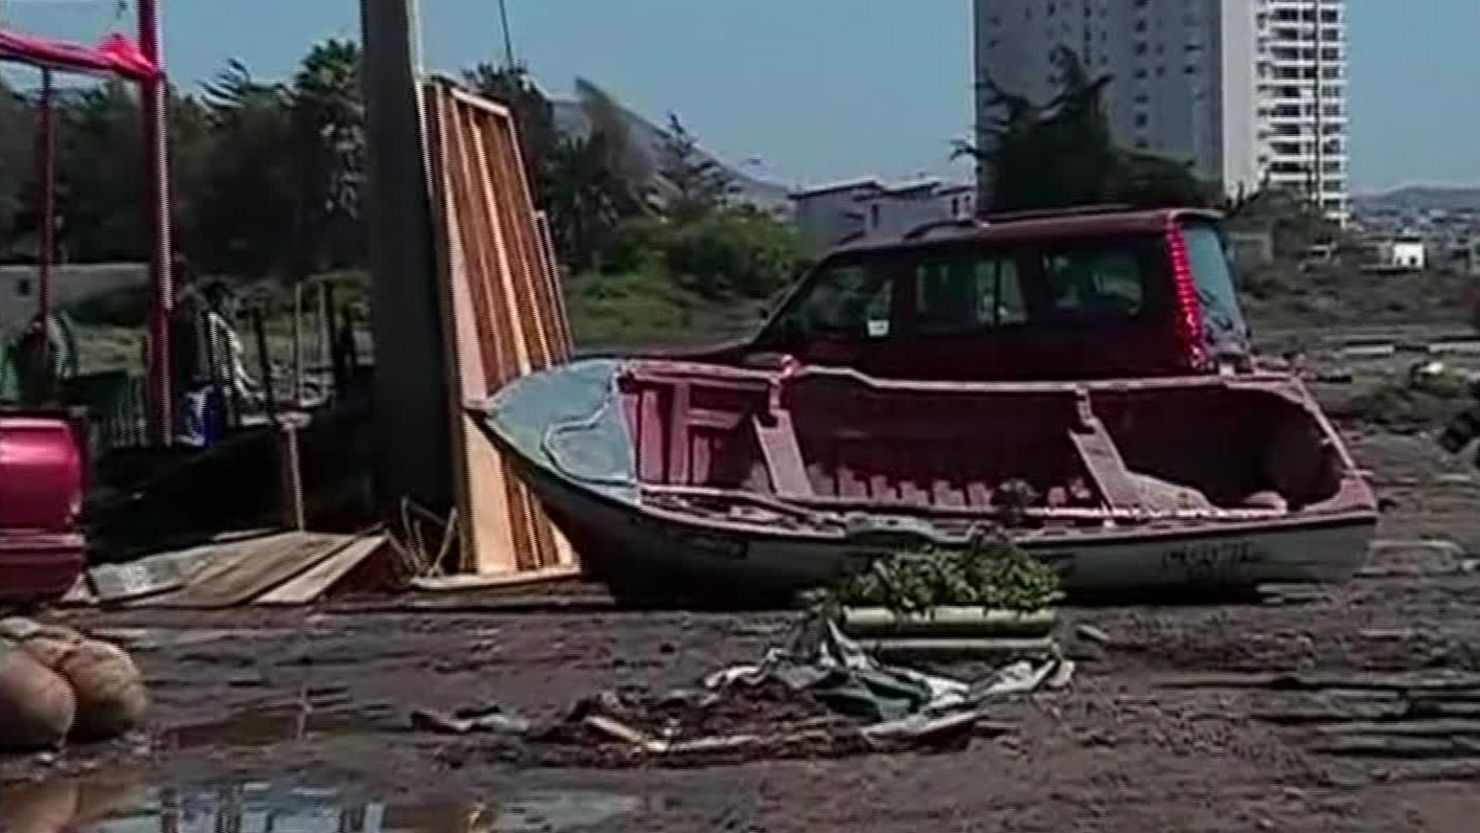 In September, an 8.3 magnitude earthquake in Chile triggered a 16-foot tsunami. Some of the damage is shown in this photo. On Saturday, a new, magnitude-6.8 earthquake rocked the central coast of the country.